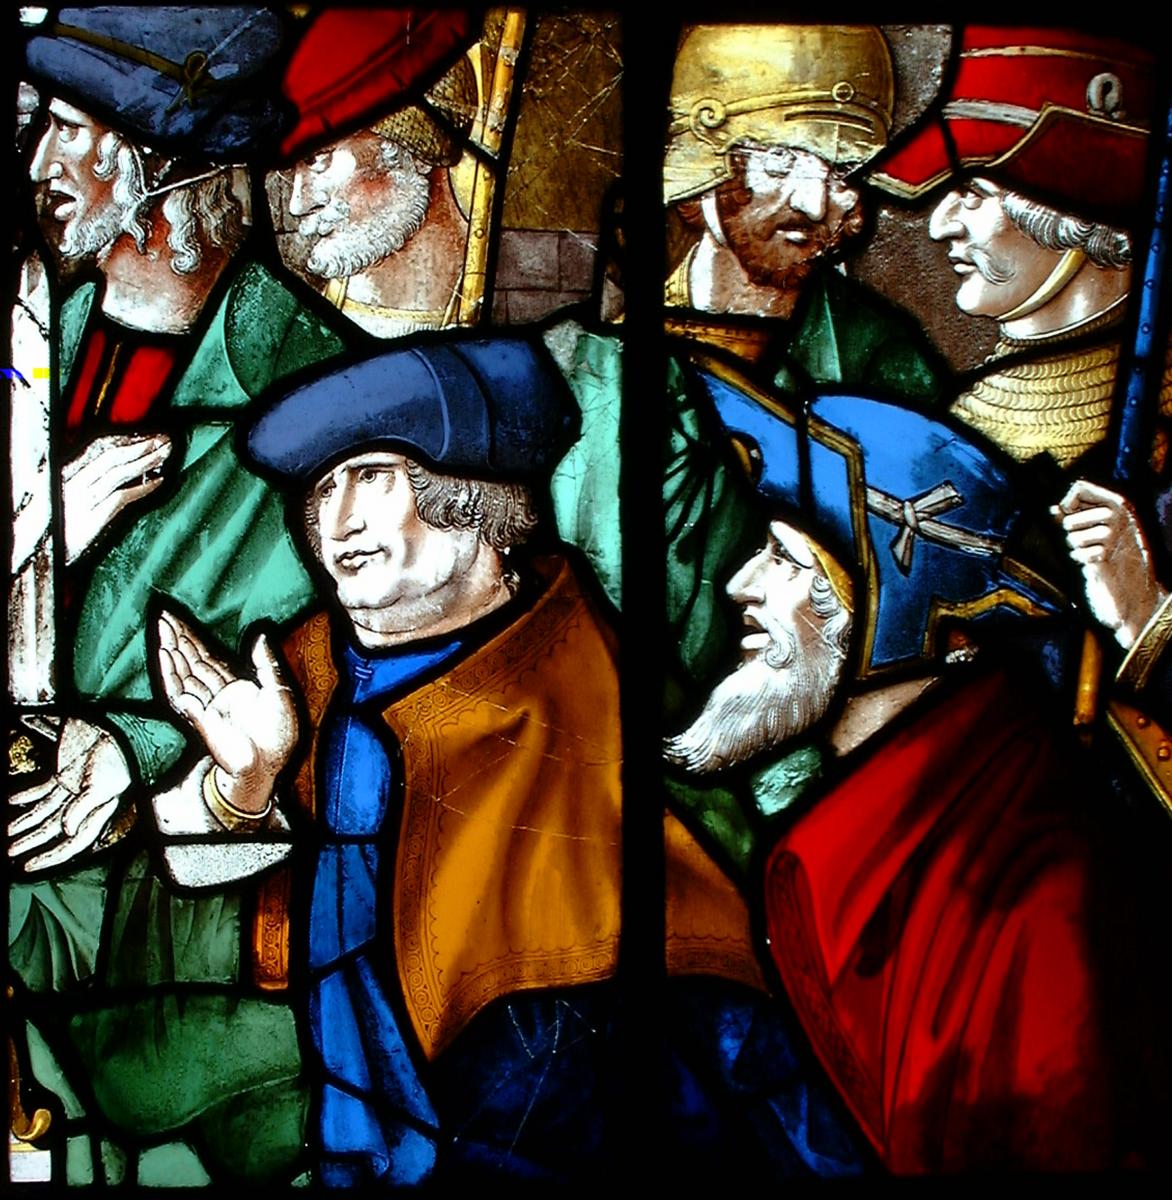 Stained glass - 20th Century Art, Techniques, History